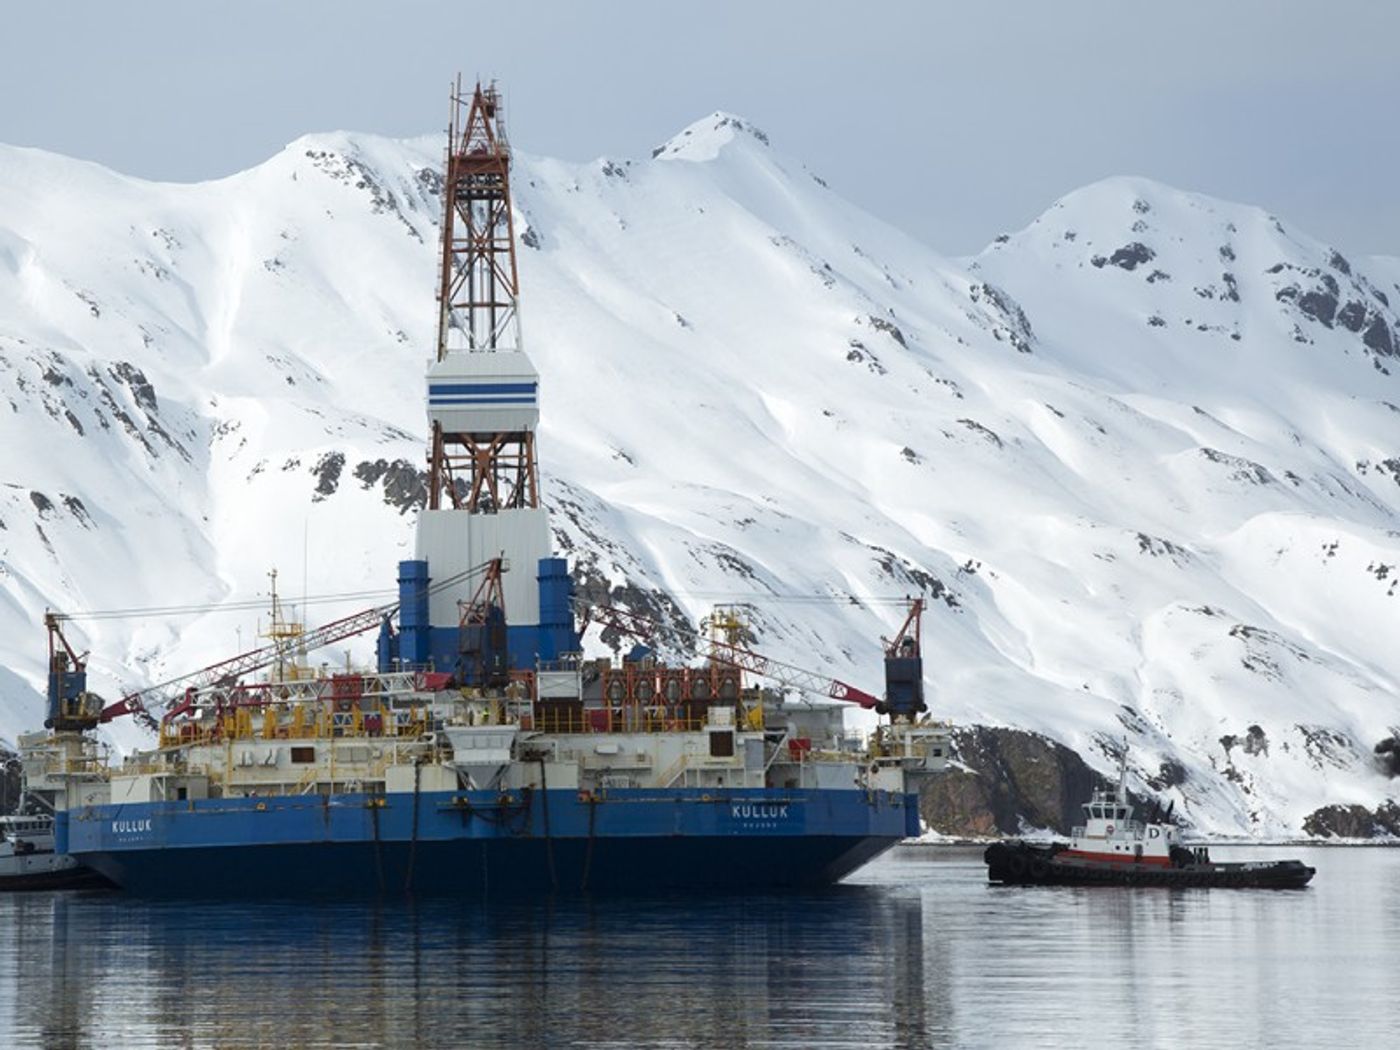 Drilling in the Arctic may become a reality. Photo: Earthjustice